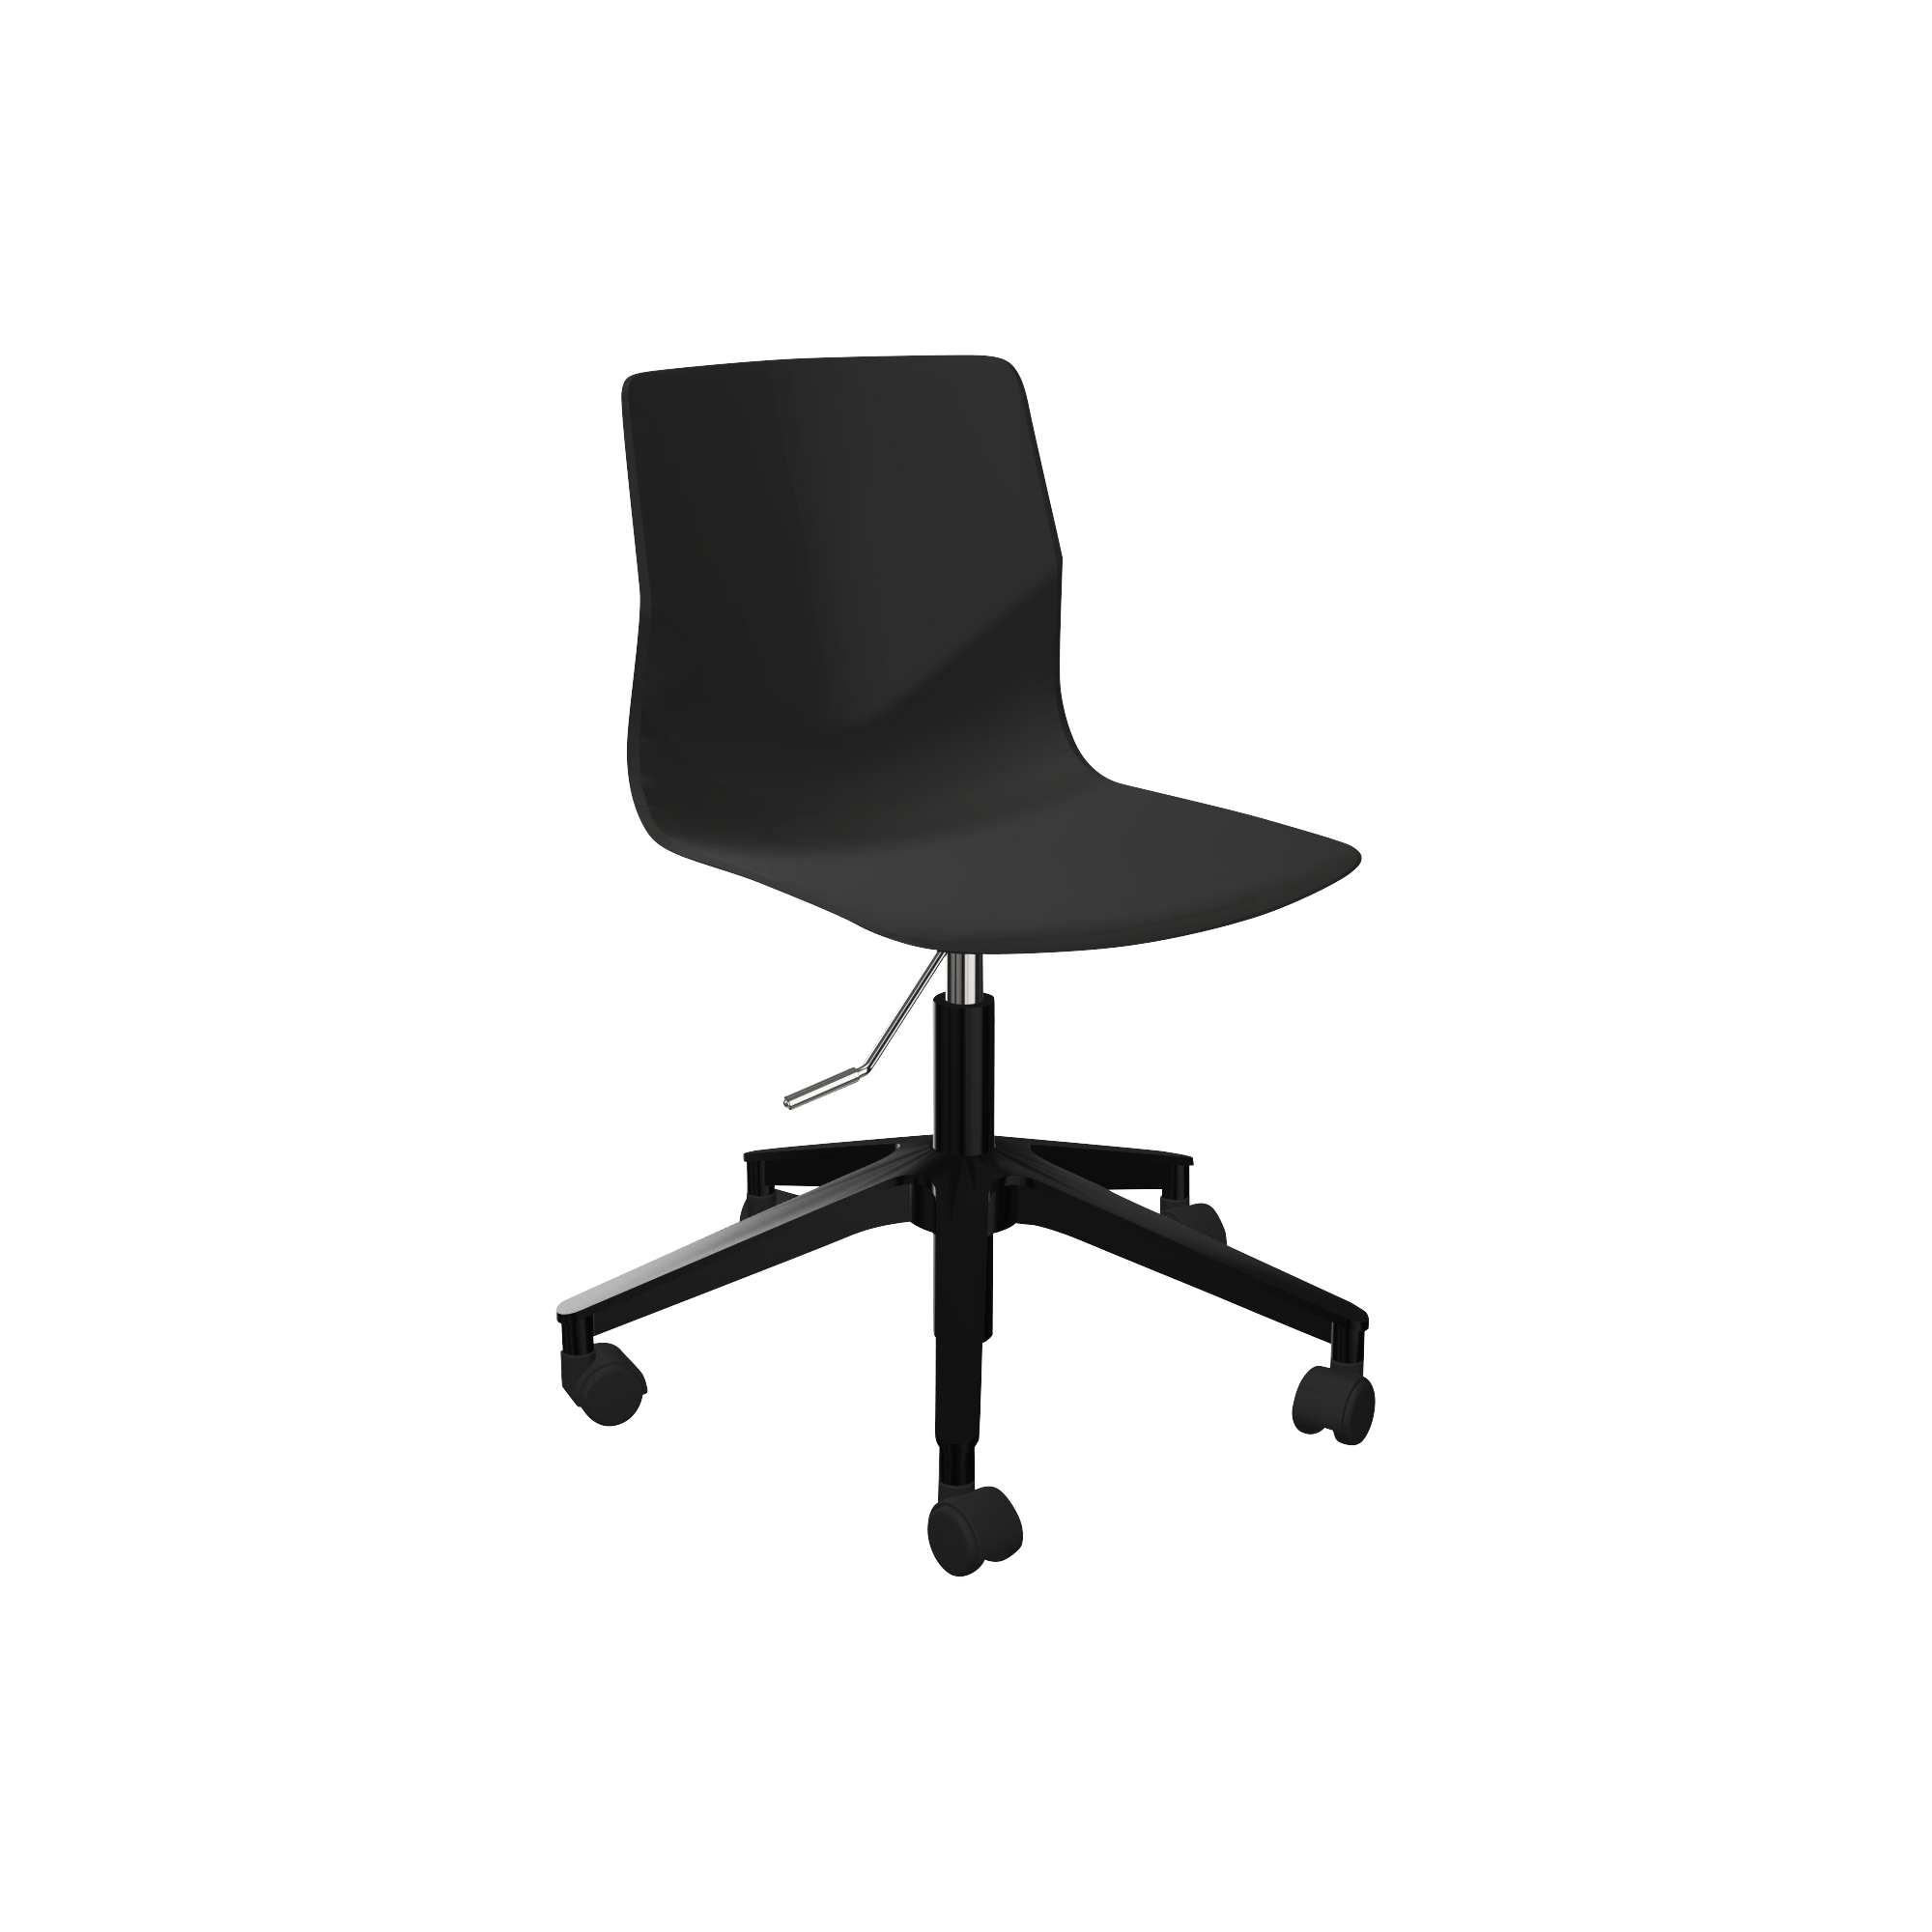 Black adjustable height office chair with wheels